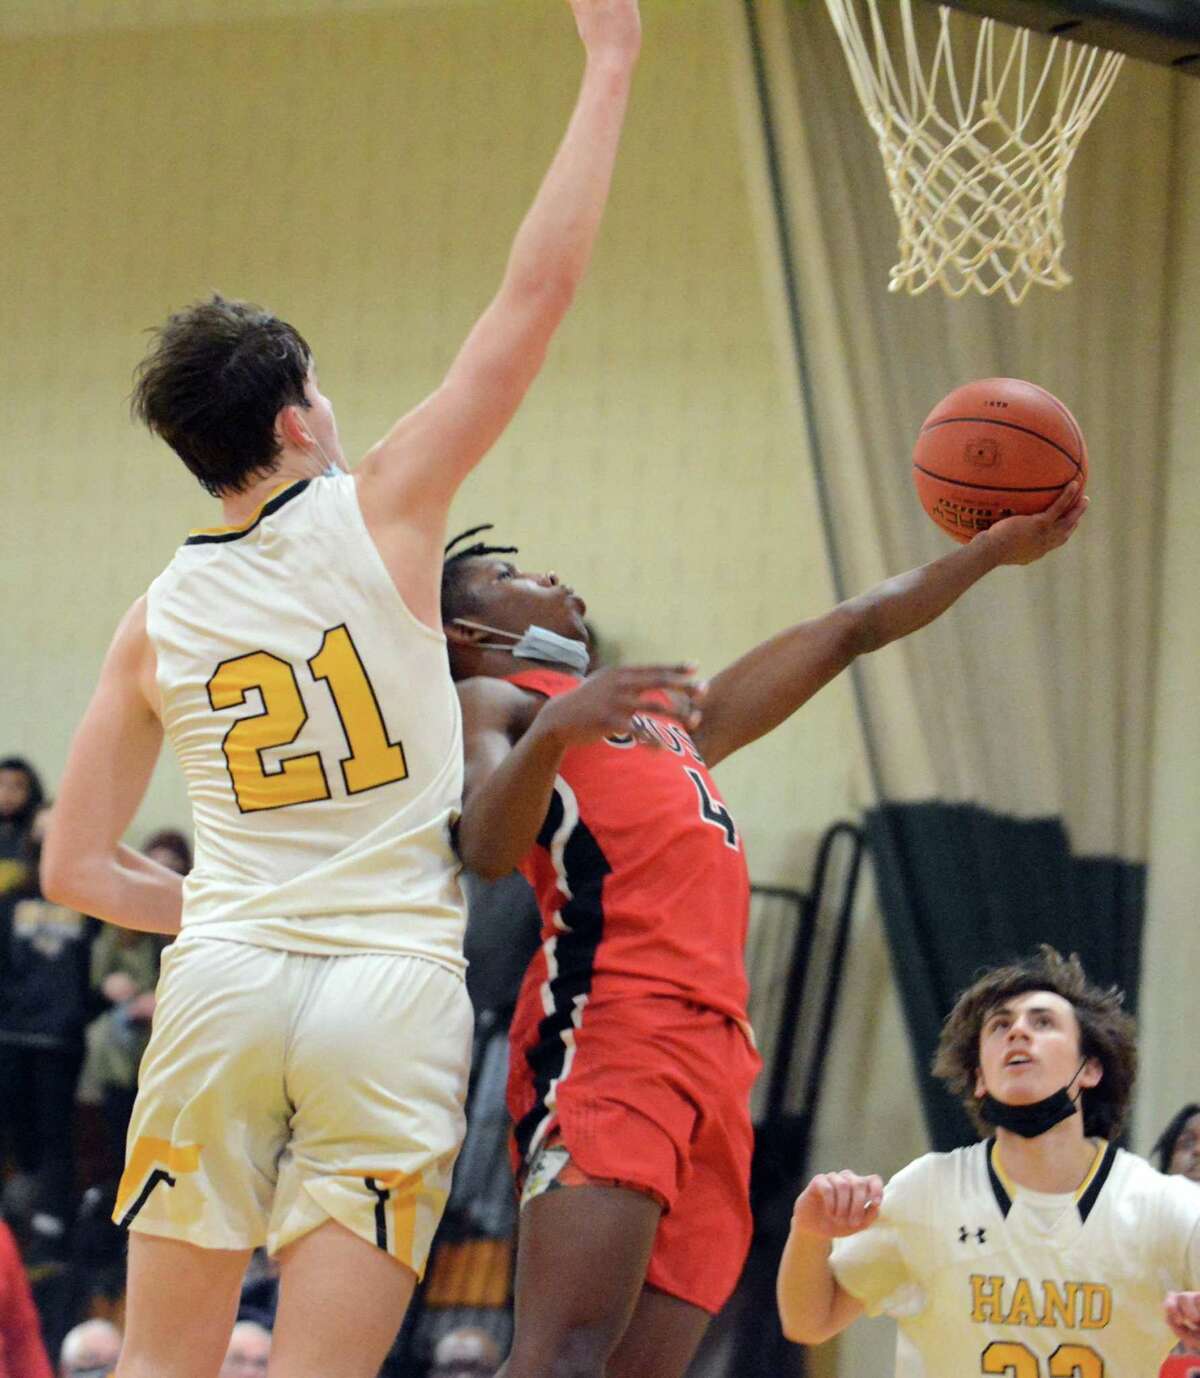 Christian McClease of Wilbur Cross scoops a shot off the glass while being guarded by Tyler Favre of Hand during the Tigers’ 78-50 win on Tuesday in Madison.